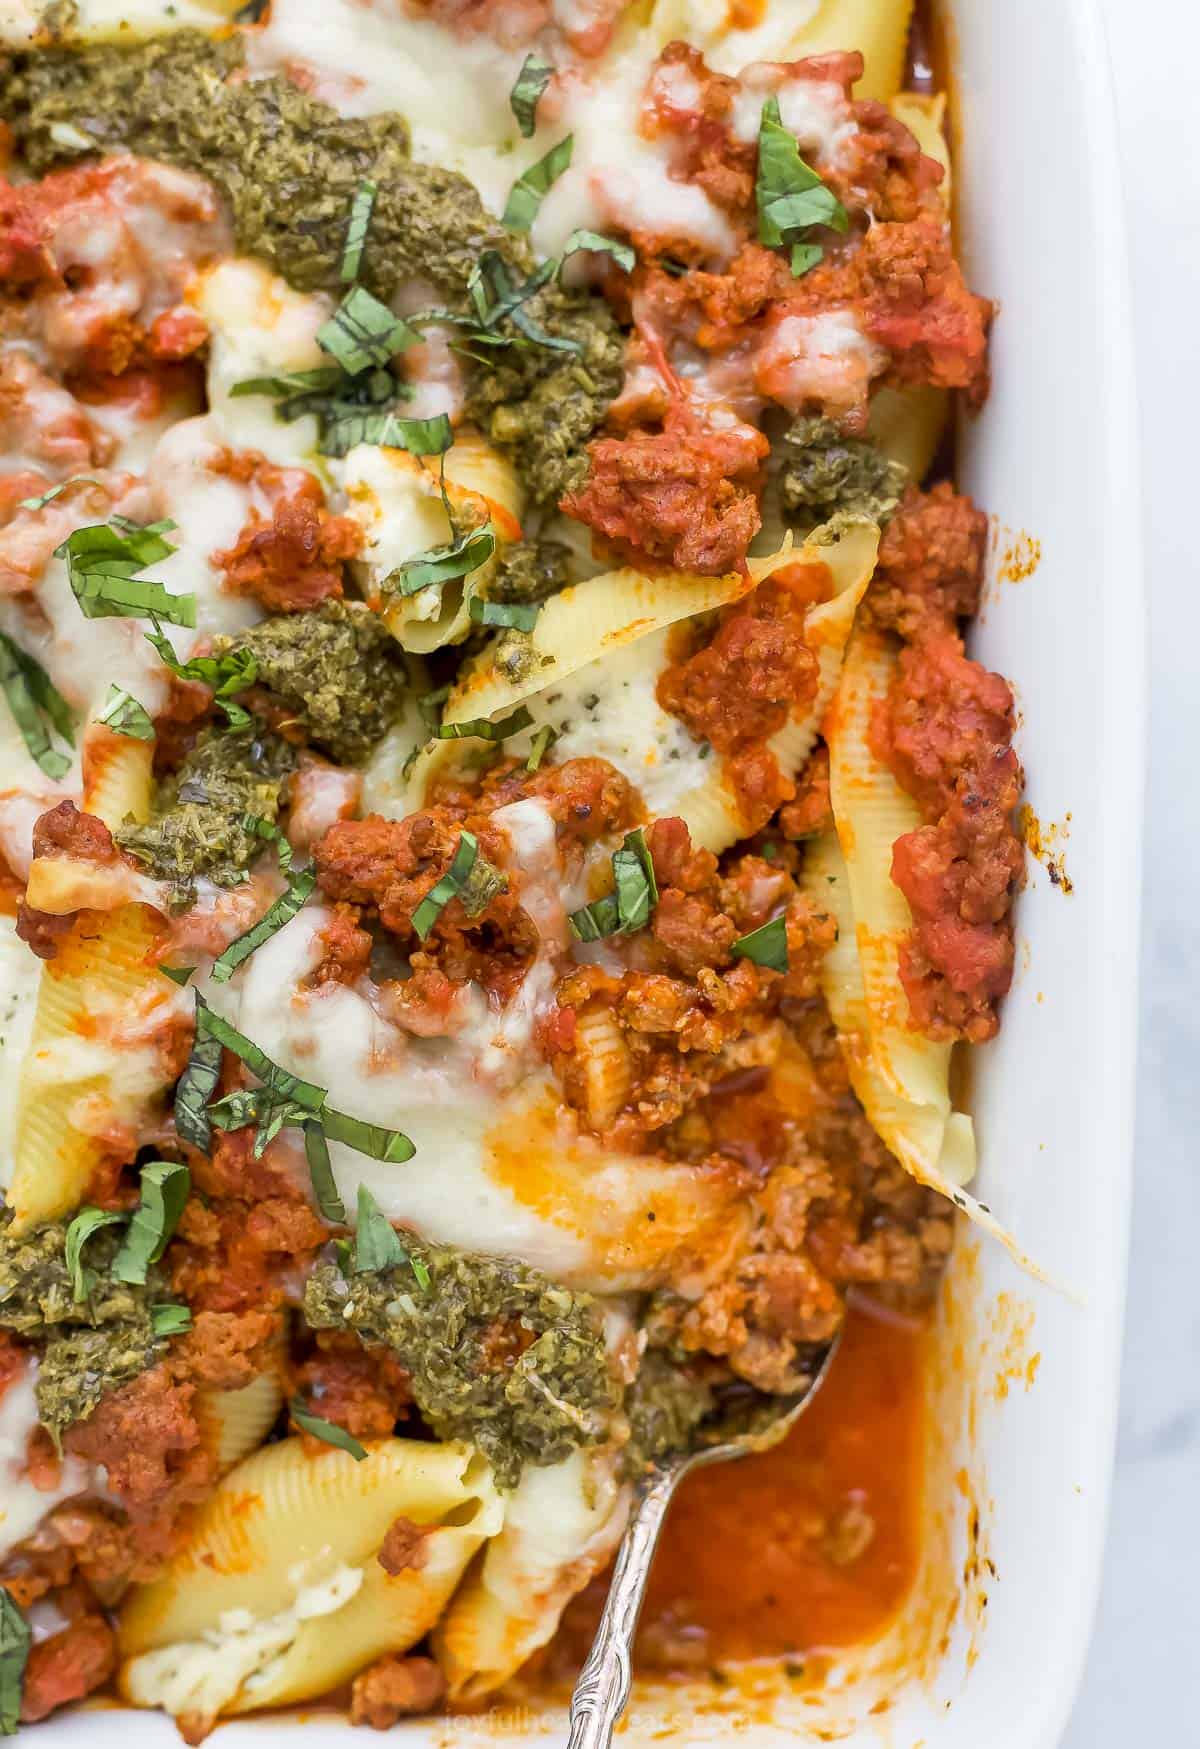 A white casserole dish containing stuffed shells with meat sauce and a garnish of pesto and fresh basil